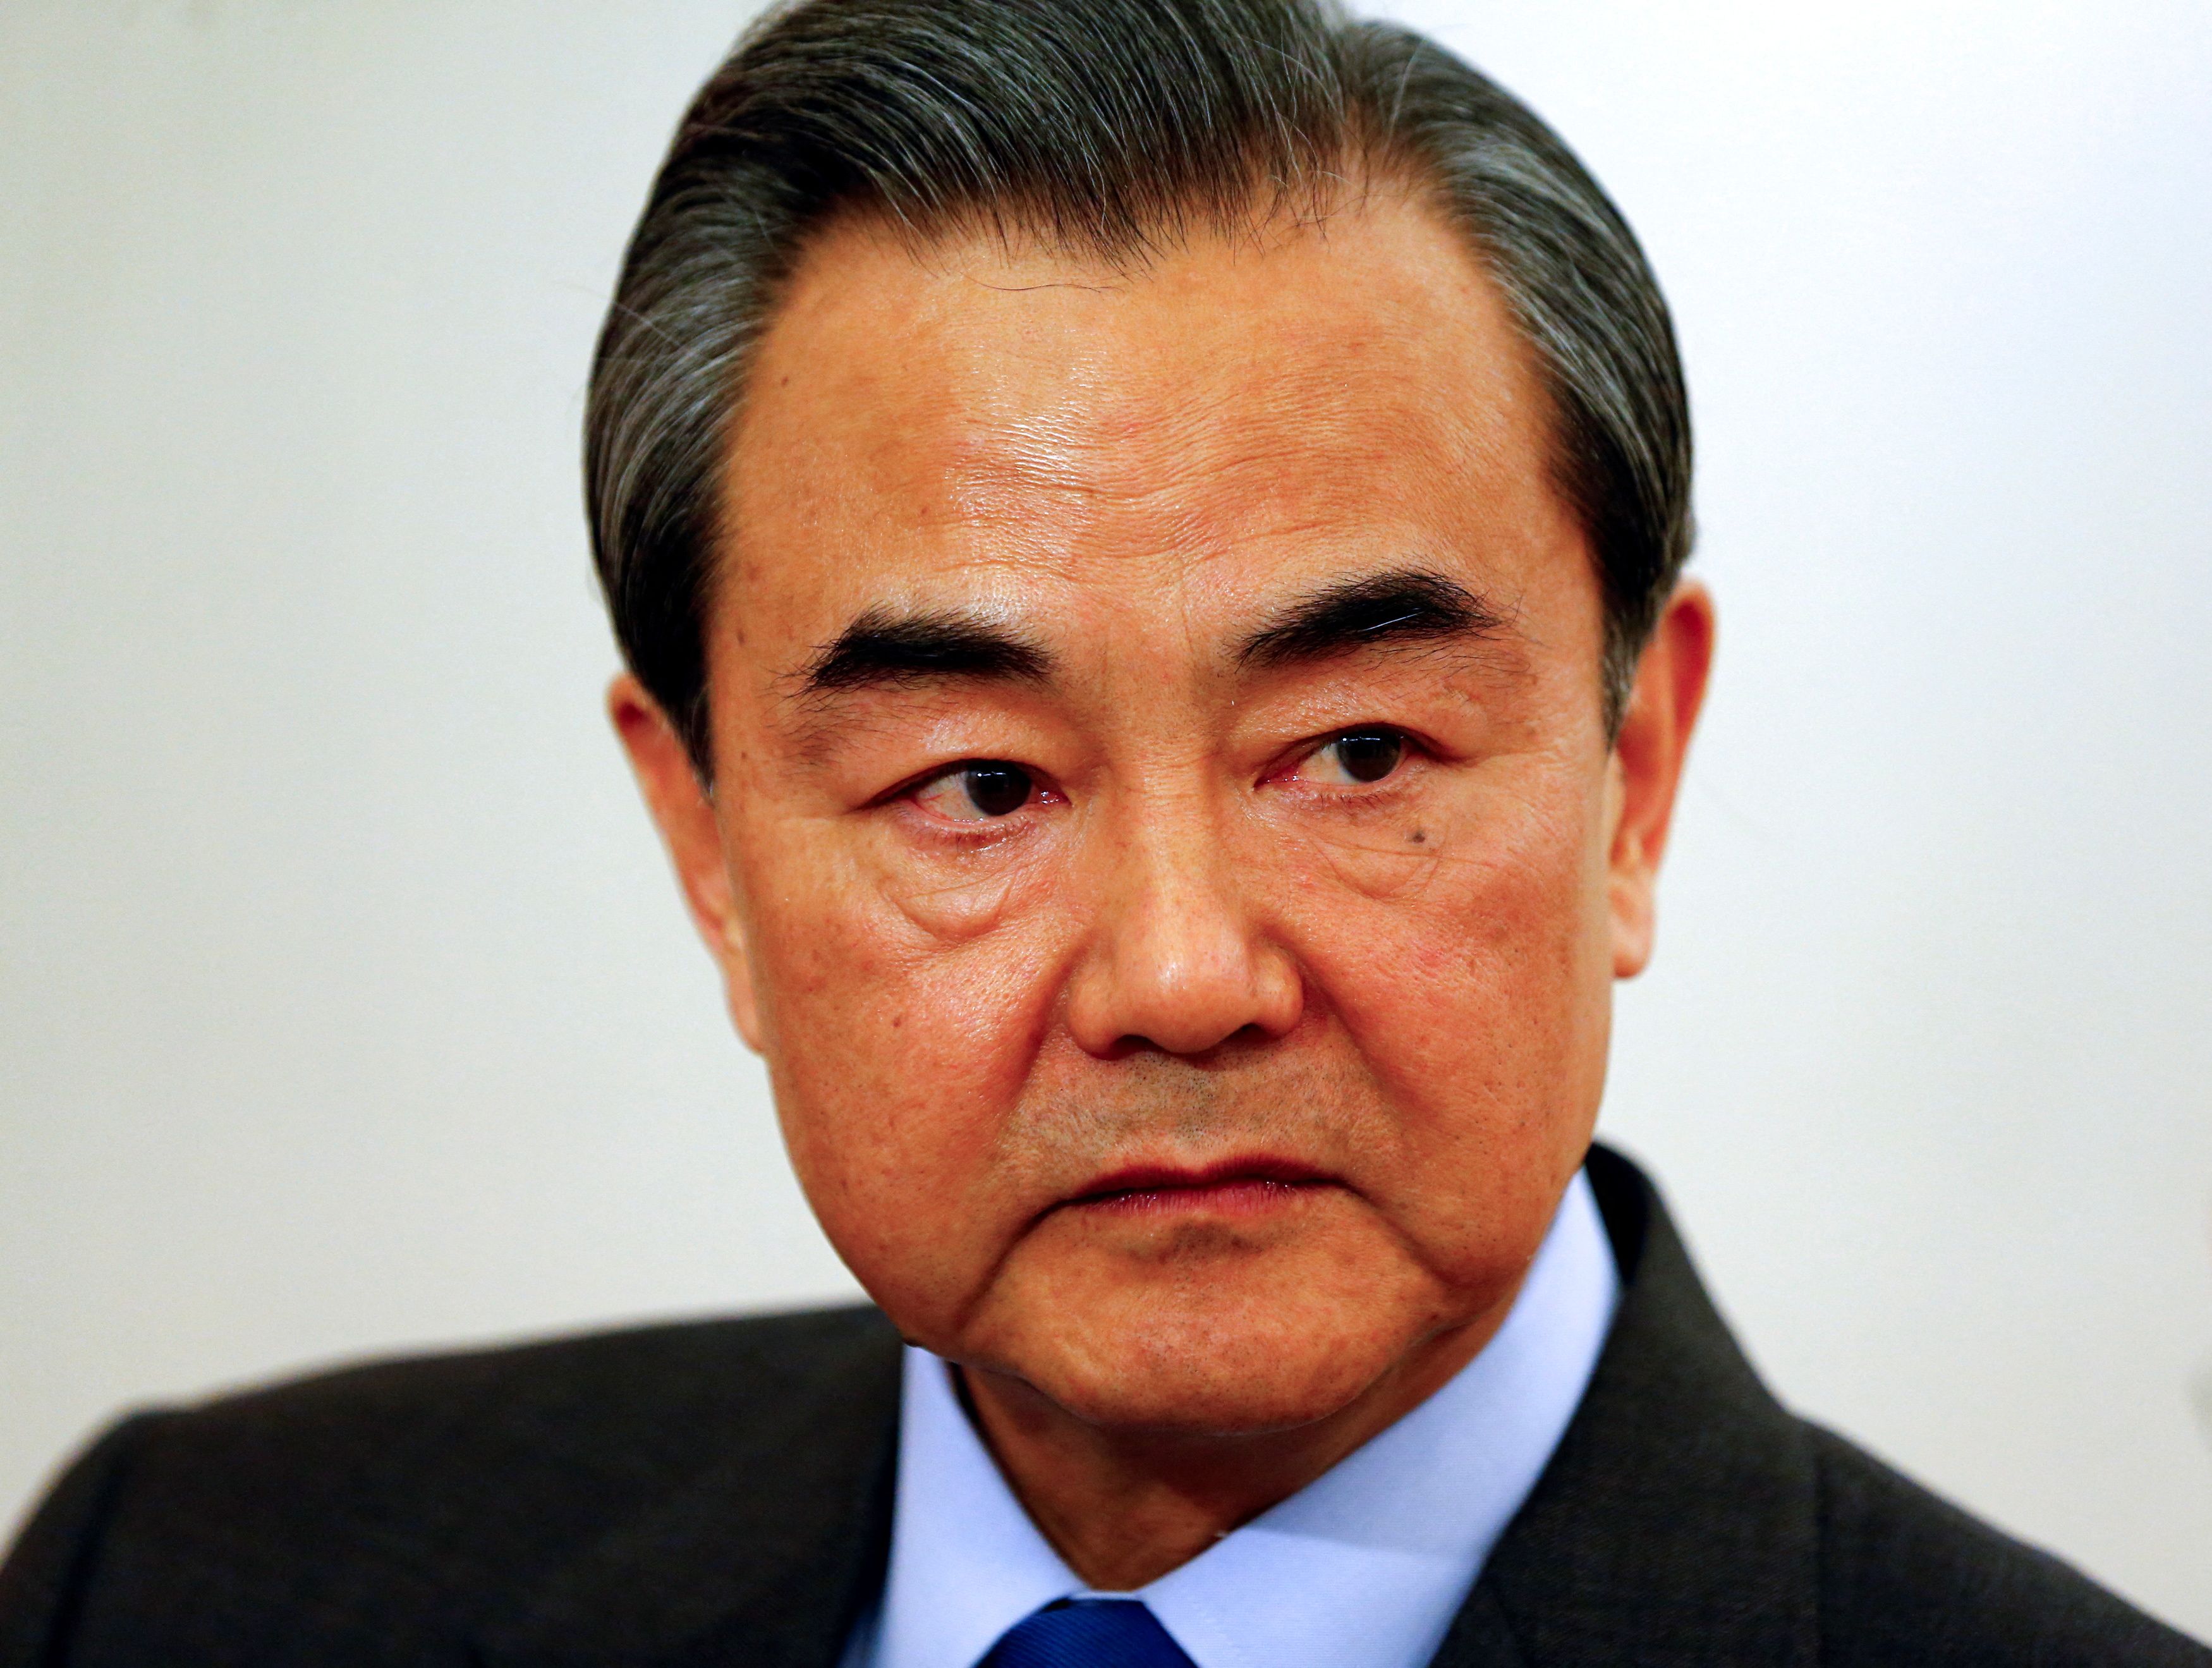 China's Foreign Minister Wang answers reporter's questions during a Reuters interview in Munich